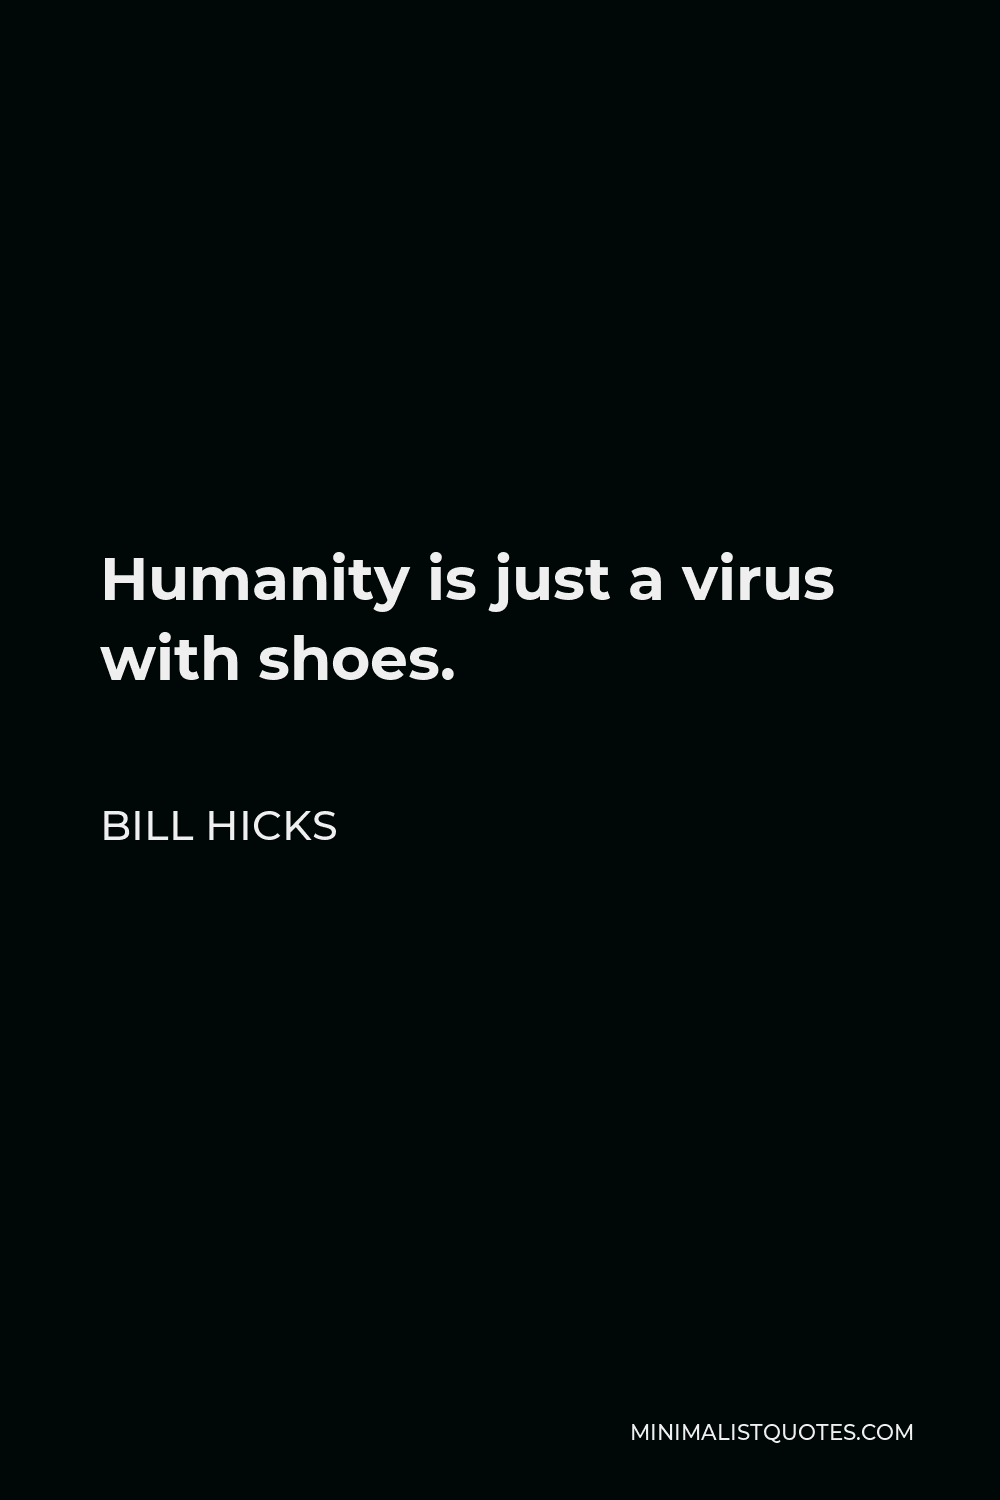 Bill Hicks Quote - Humanity is just a virus with shoes.